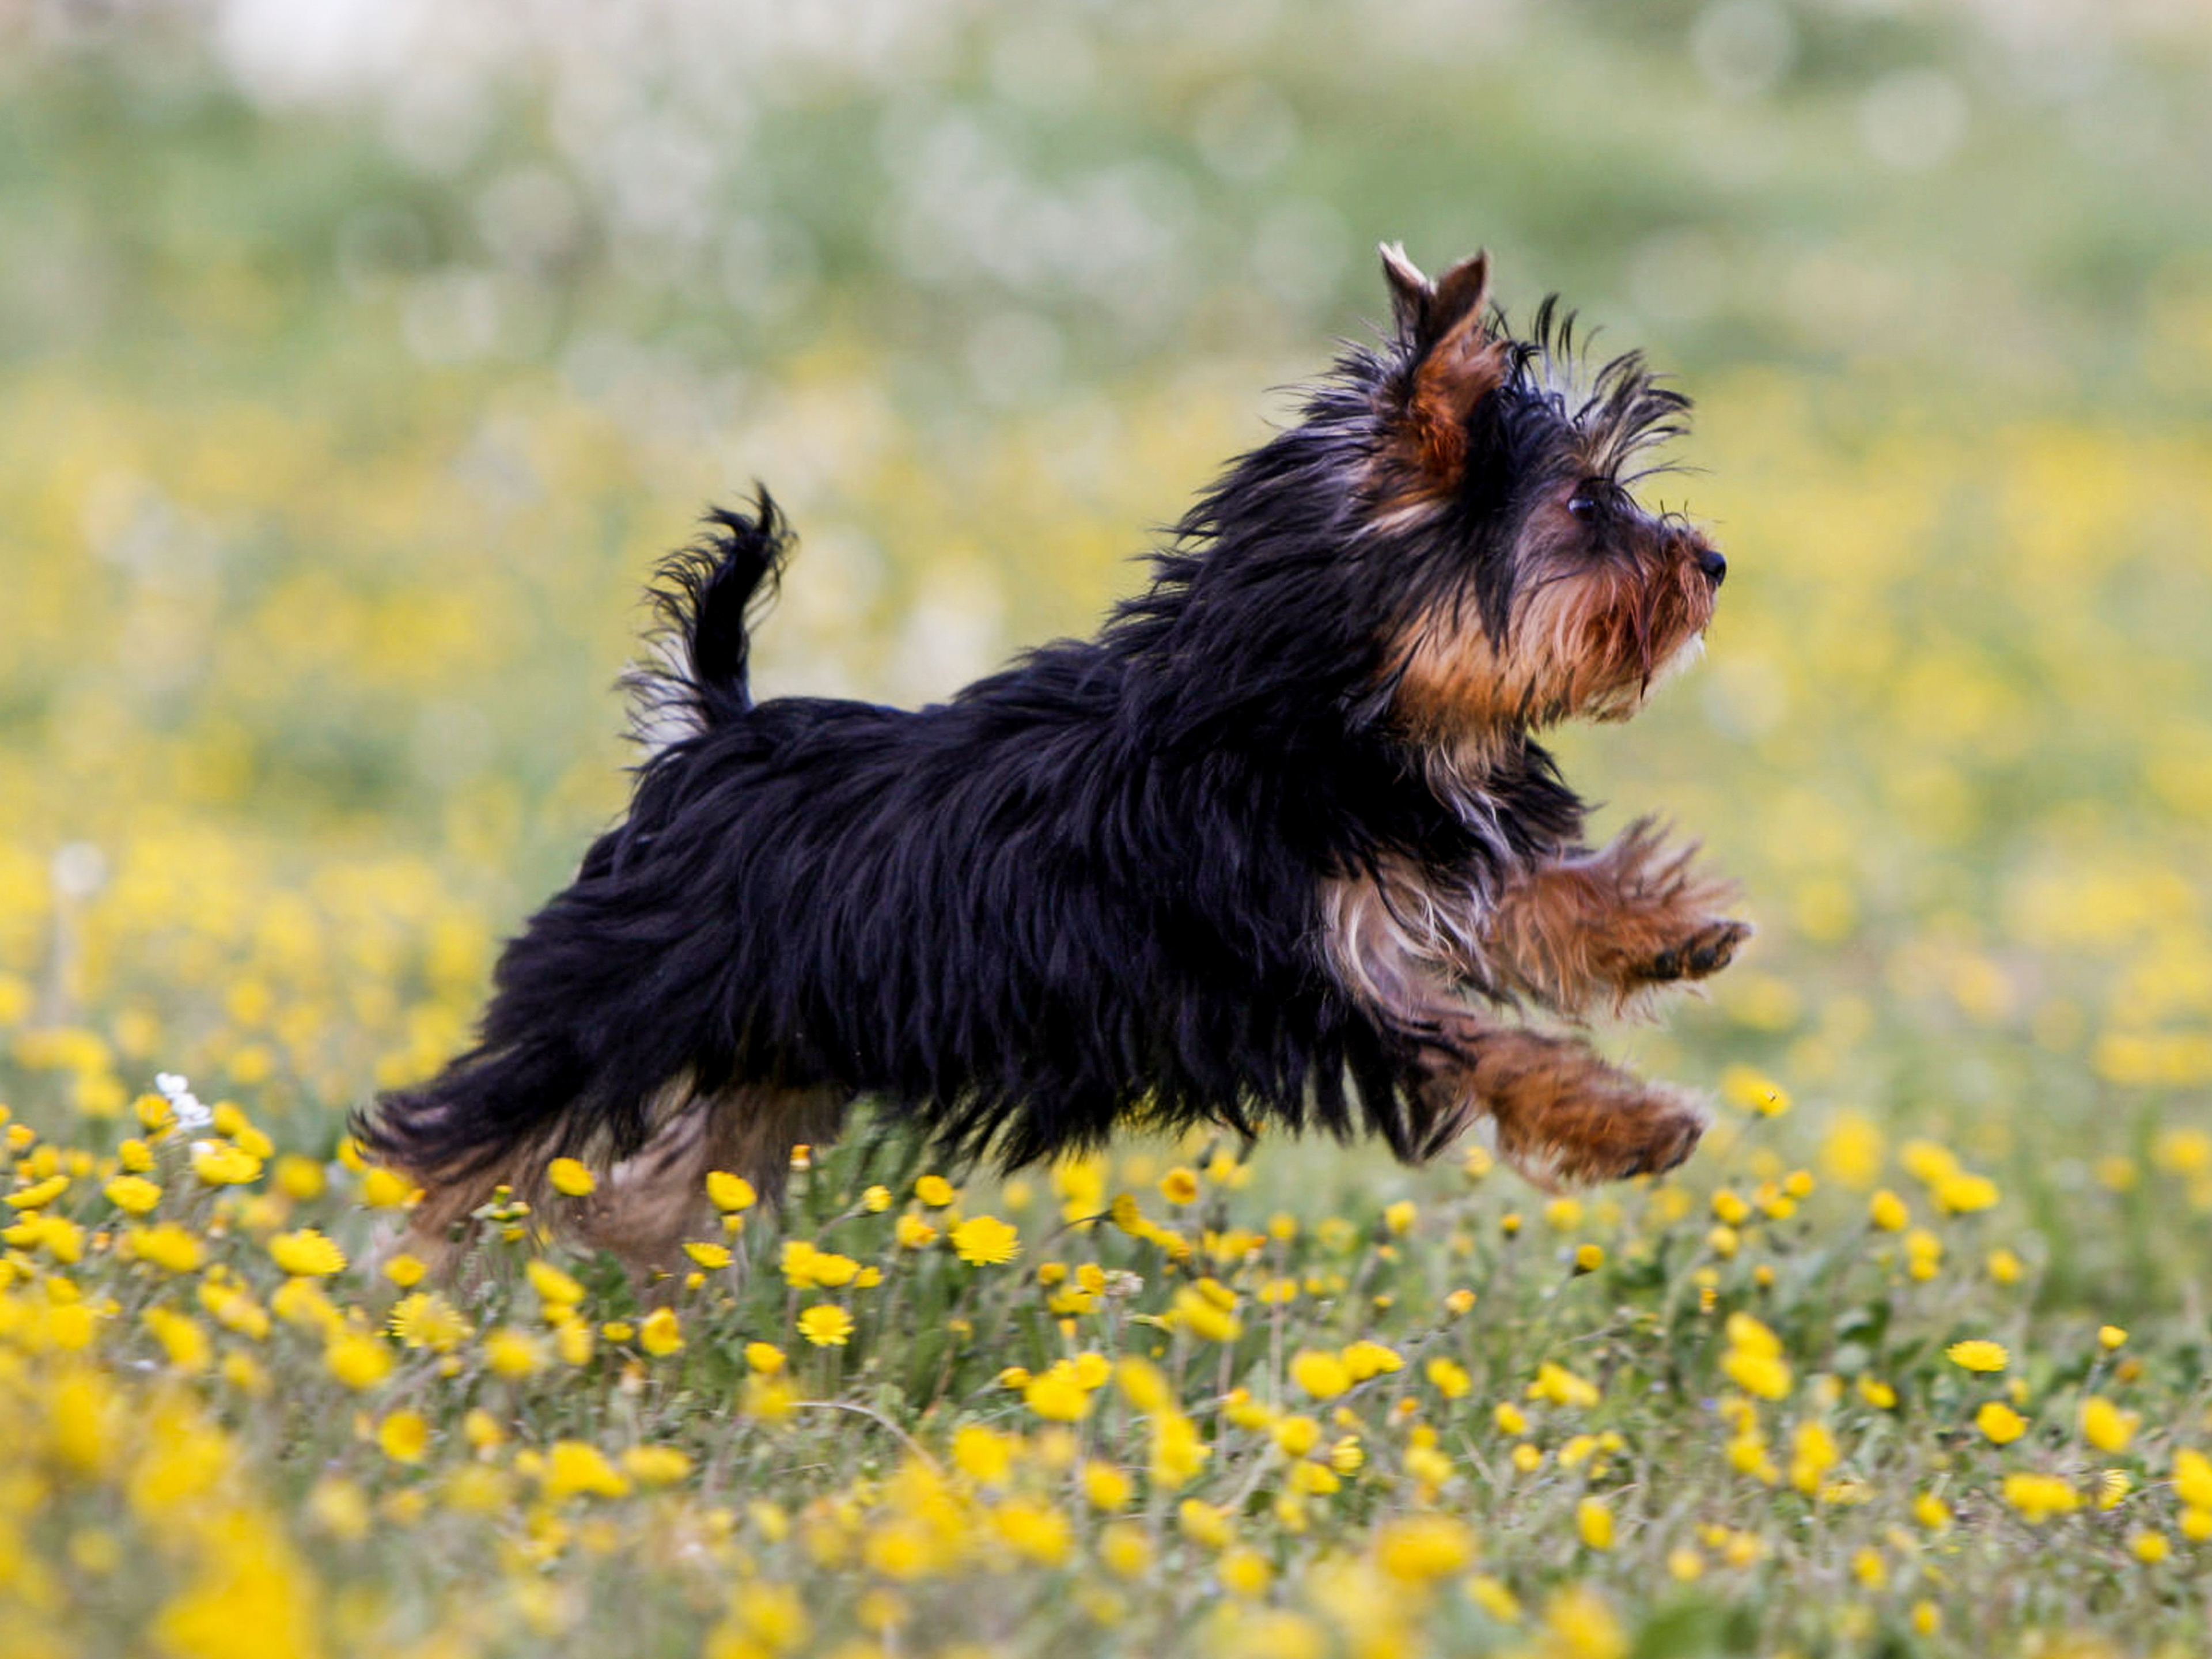 Yorkshire Terrier puppy running outdoors through yellow flowers